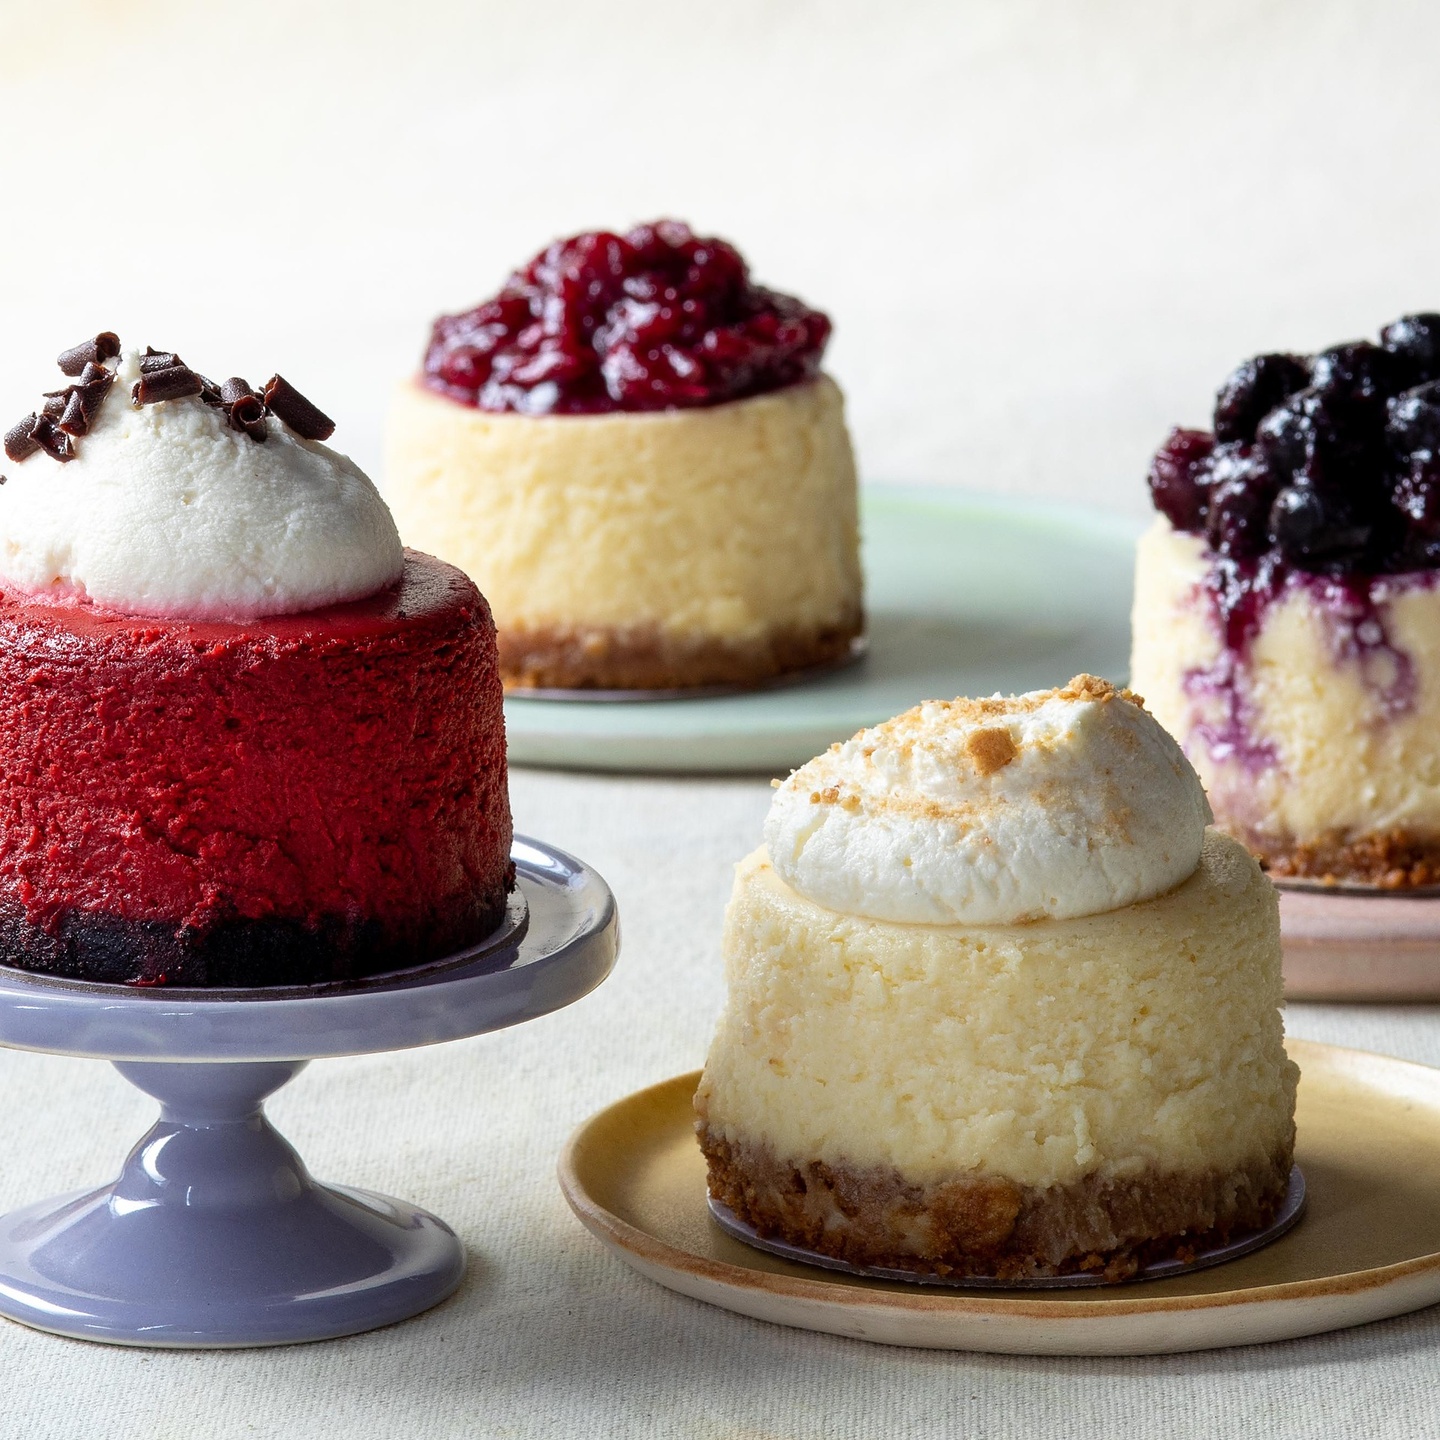 Søjle Logisk Ekspression Magnolia Bakery on Twitter: "Craving cheesecake? Order ahead and pick up  this classic Magnolia Bakery icebox dessert in store today!  https://t.co/XArVYK8eJA" / Twitter